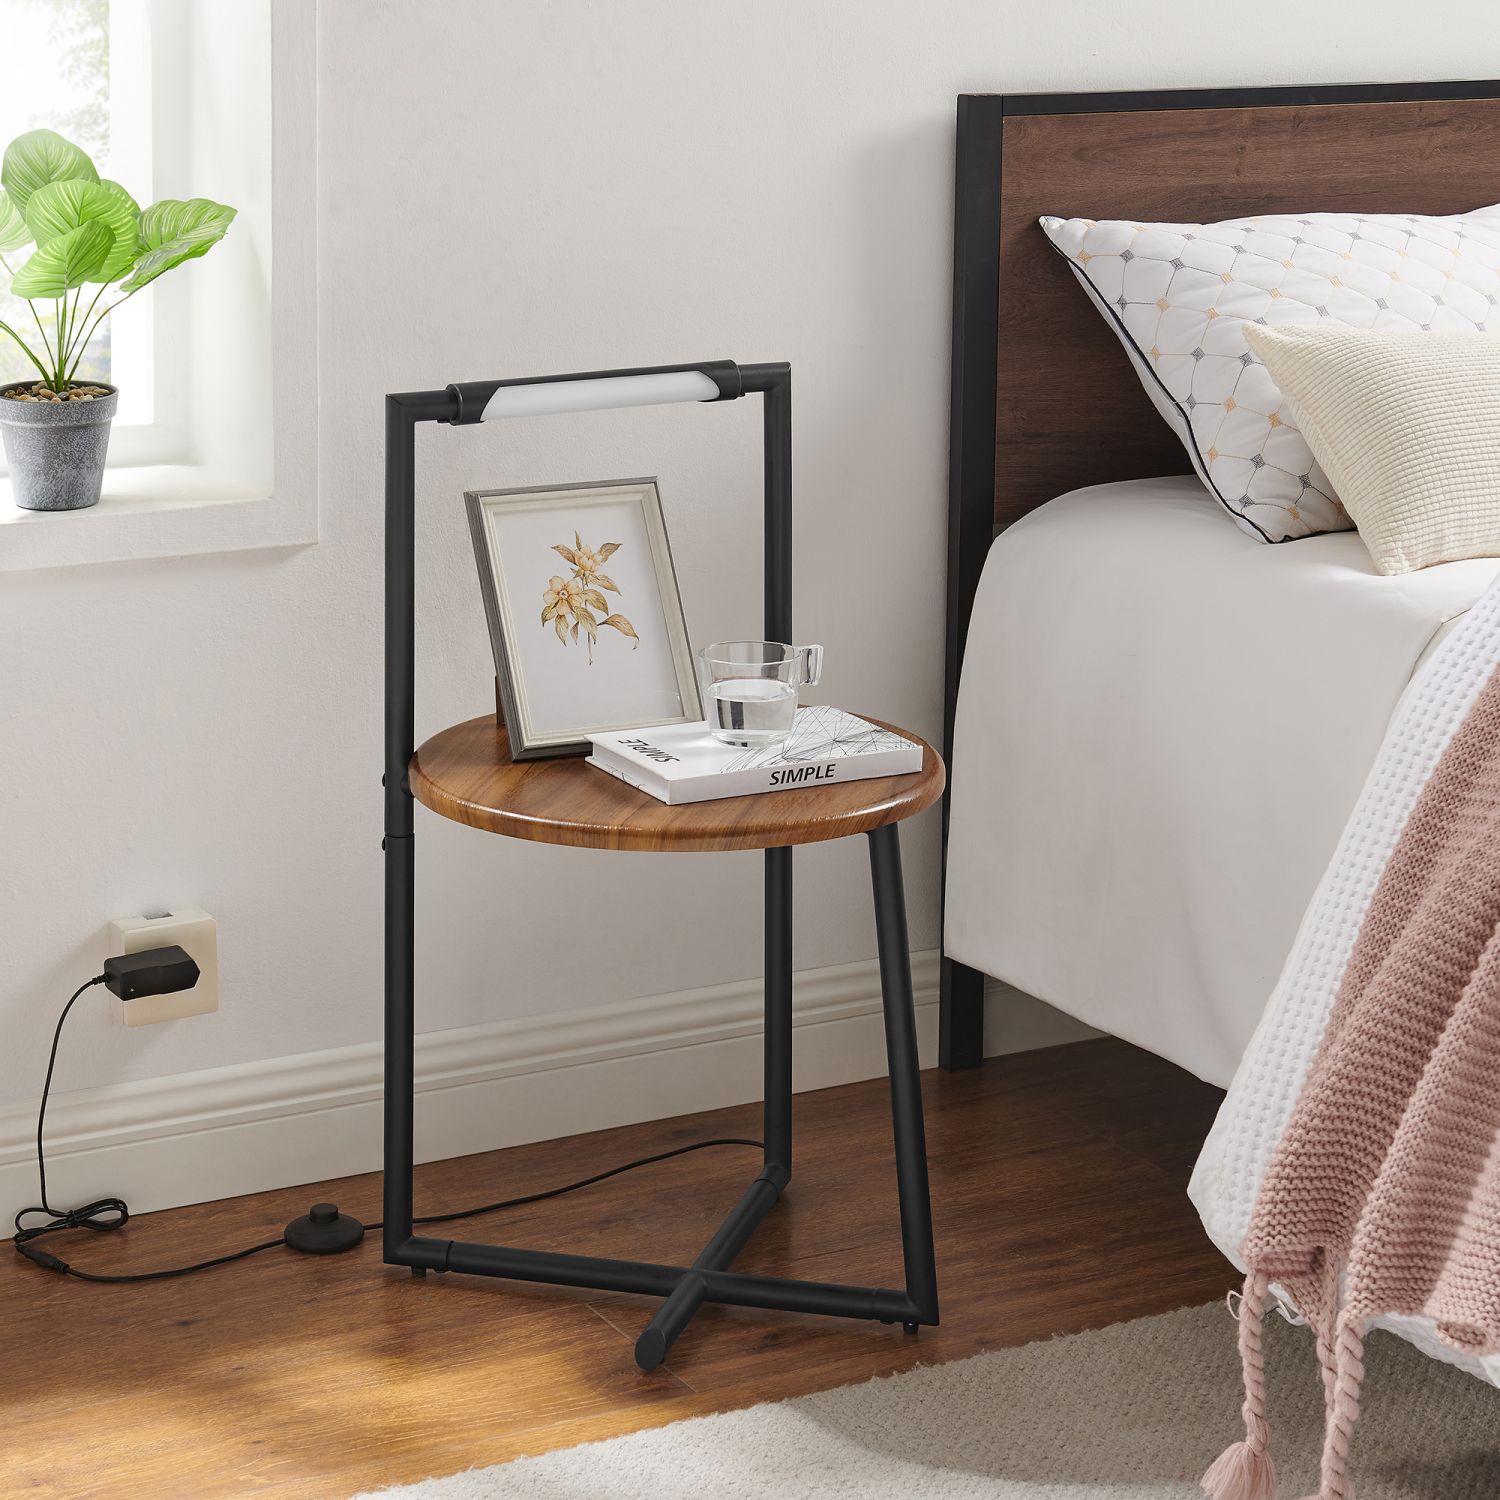 Nightstand with a Built-In Light